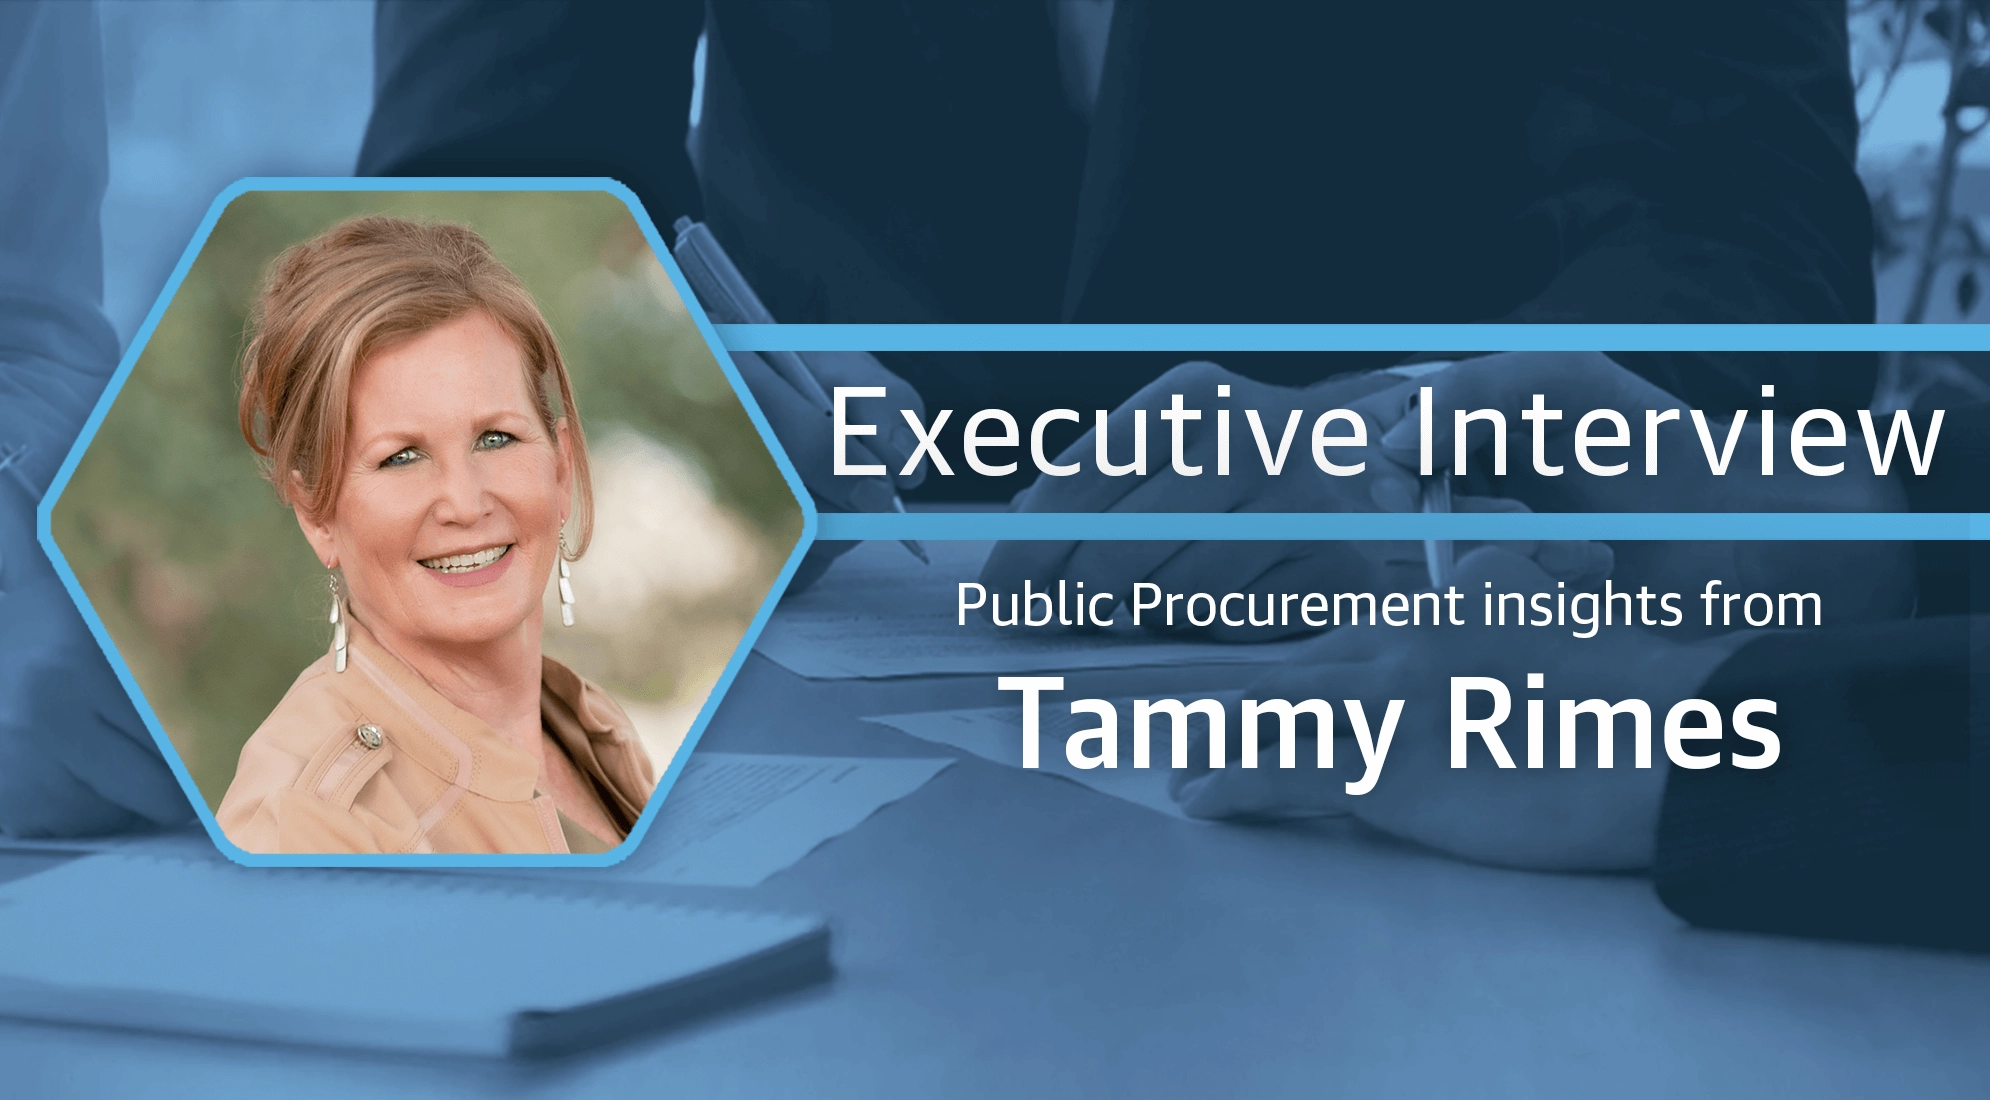 Public Procurement Insights from Tammy Rimes 5